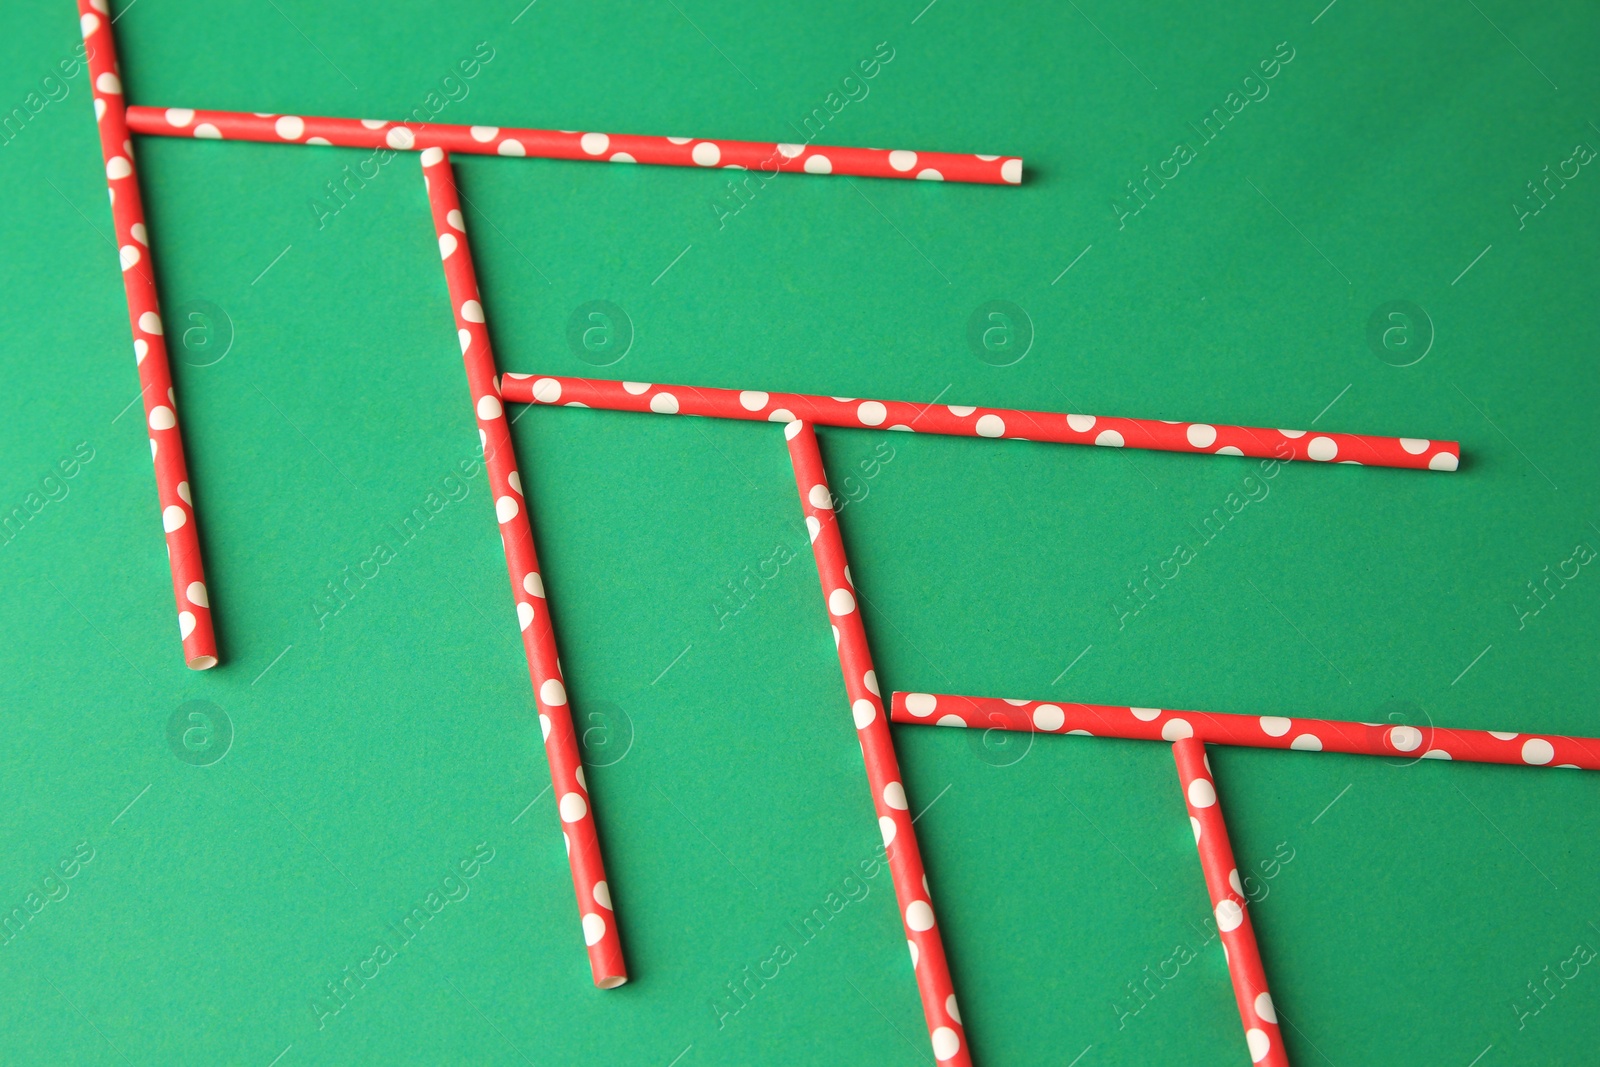 Photo of Many paper drinking straws on green background